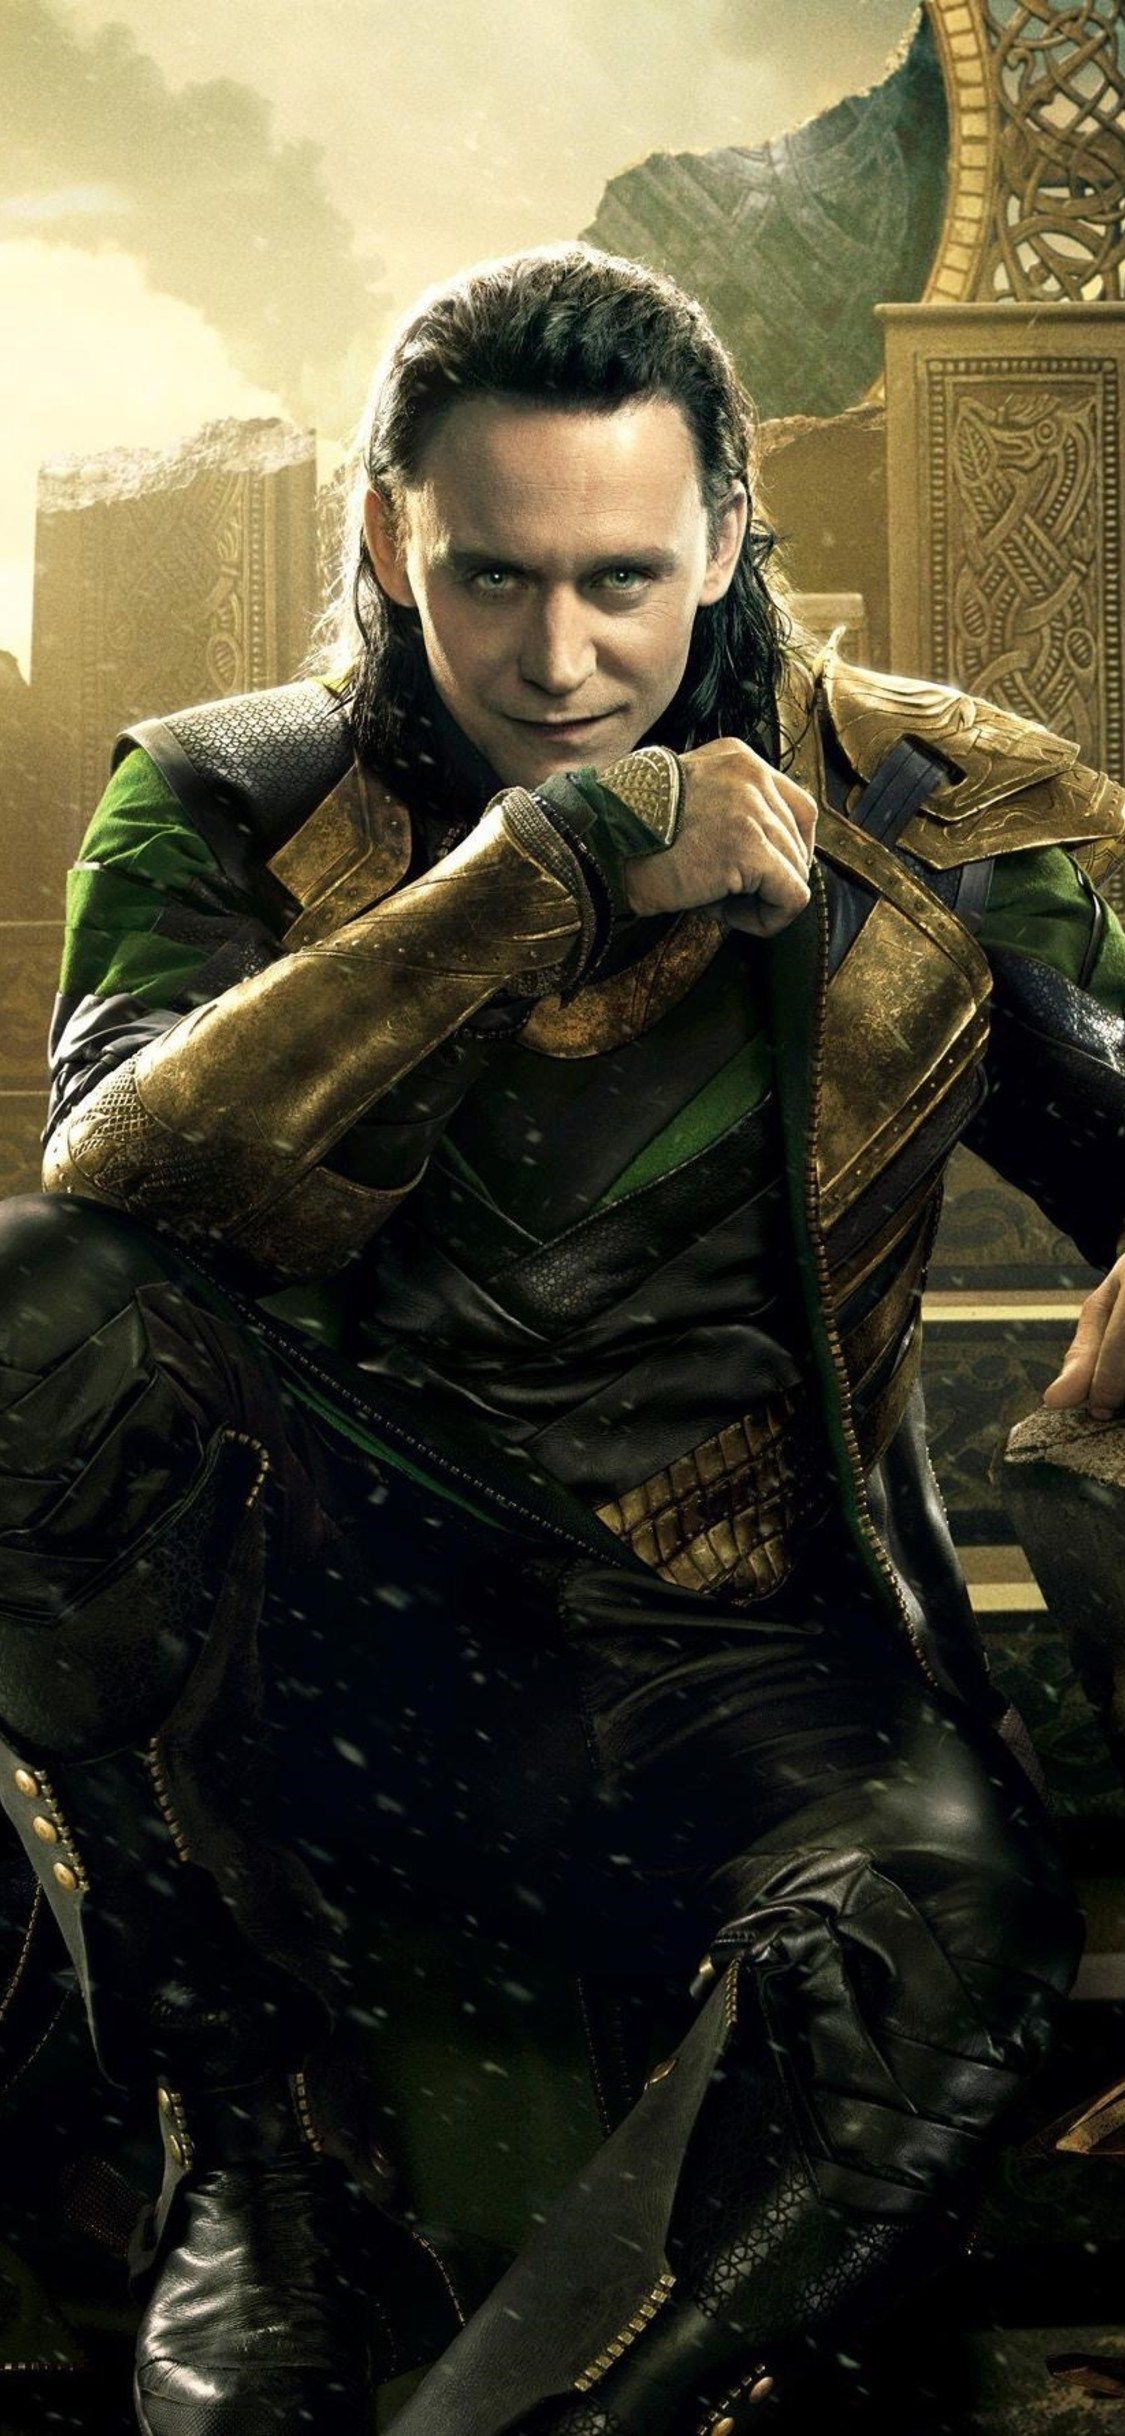 Loki In Thor Movie iPhone XS, iPhone iPhone X HD 4k Wallpaper, Image, Background, Photo and Picture. Loki movie, Marvel villains, Loki wallpaper